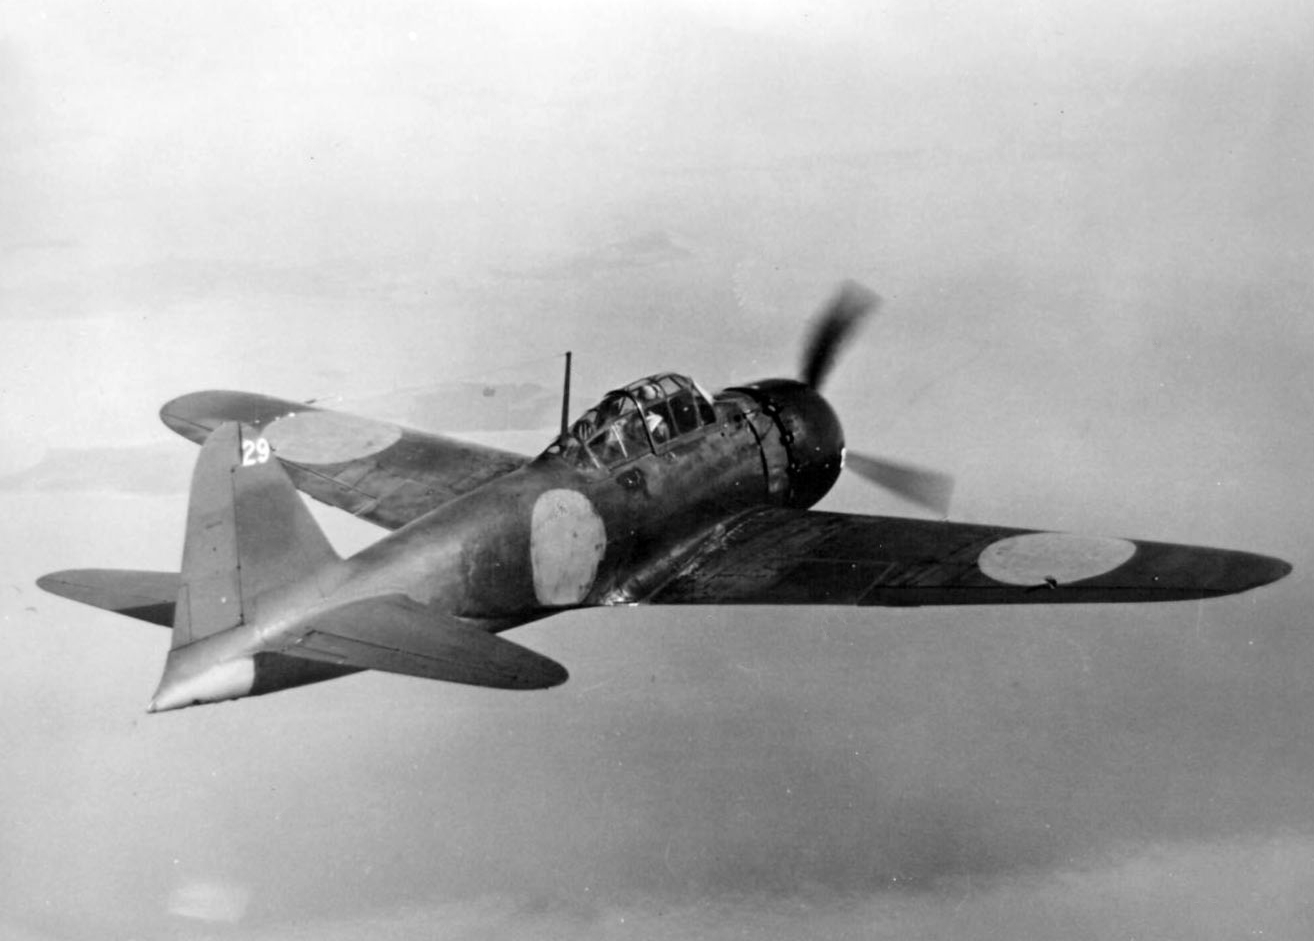 Caf Hq 10 Sep 1940 Was An Auspicious Day For The Imperial Japanese Navy The Mitsubishi A6m Zero Scored Its First Aerial Victories Attacking 27 Nationalist Chinese Fighters Over Chongqing